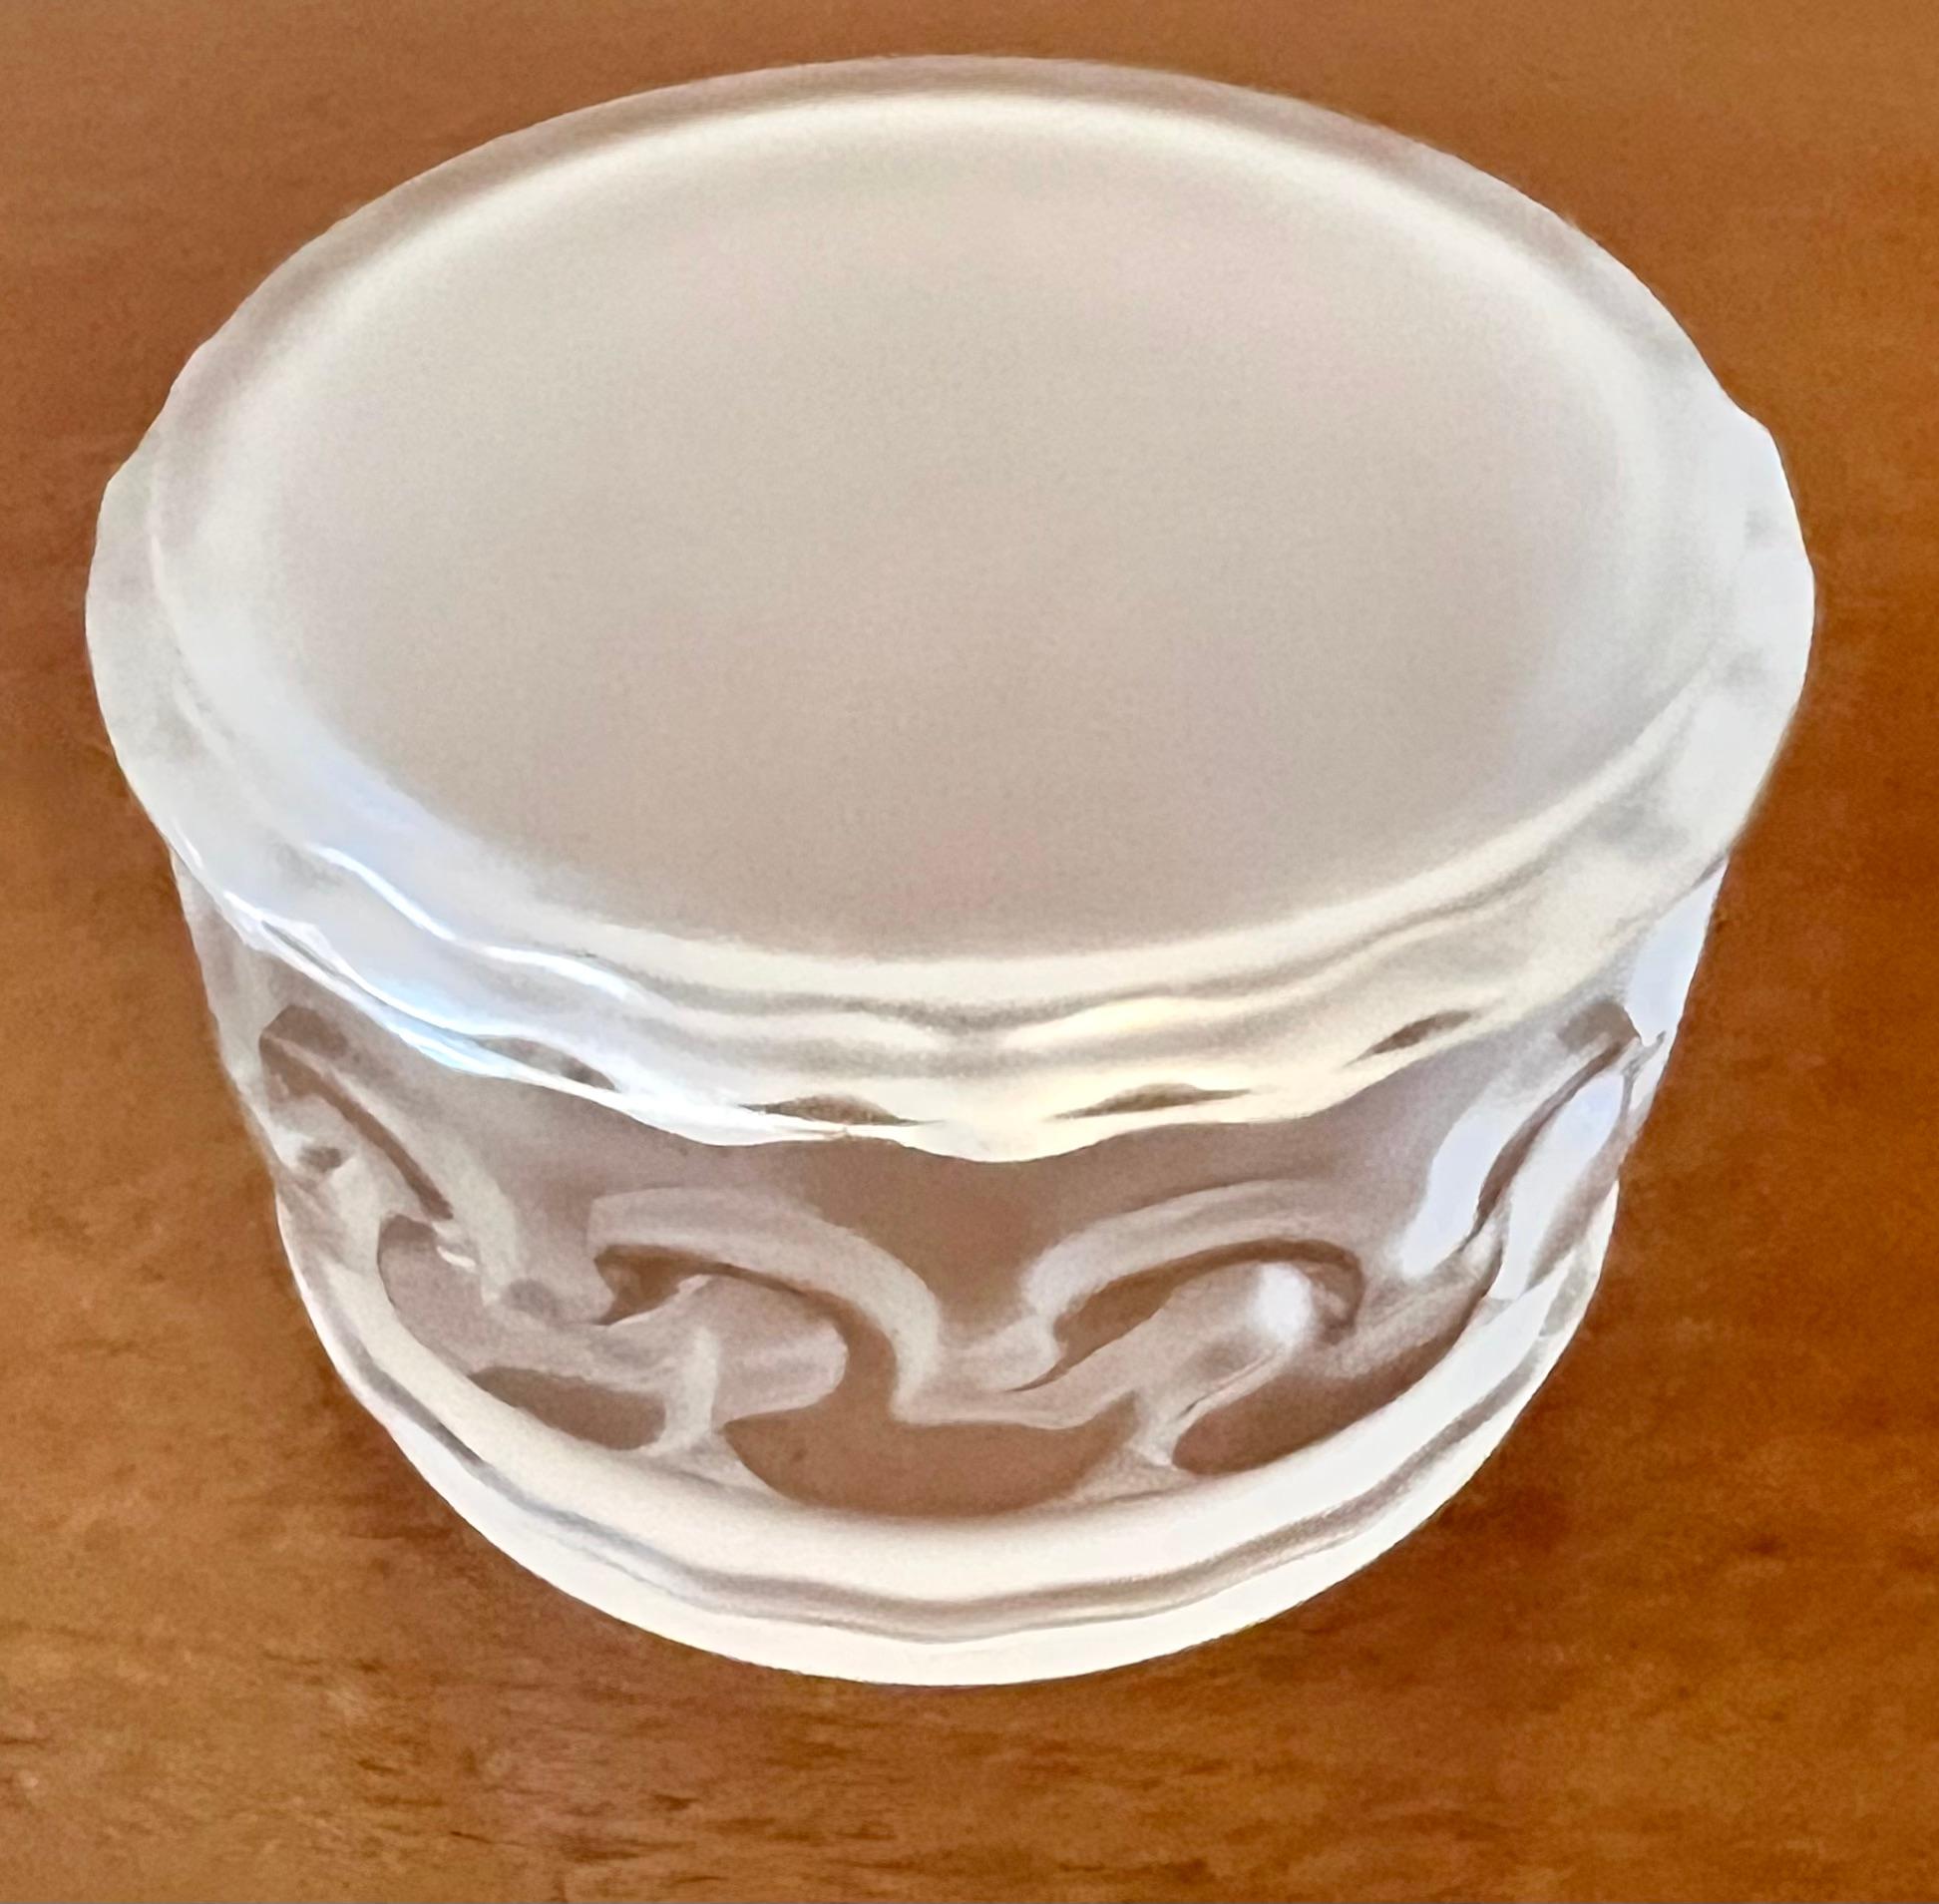 a special Lalique Paris frosted glass lidded box.

Could be used for any vanity supplies, cotton balls, etc., or on a desk or work station for office supplies, or on a cocktail table or bedside for candies, breath mints or to store rings, or even